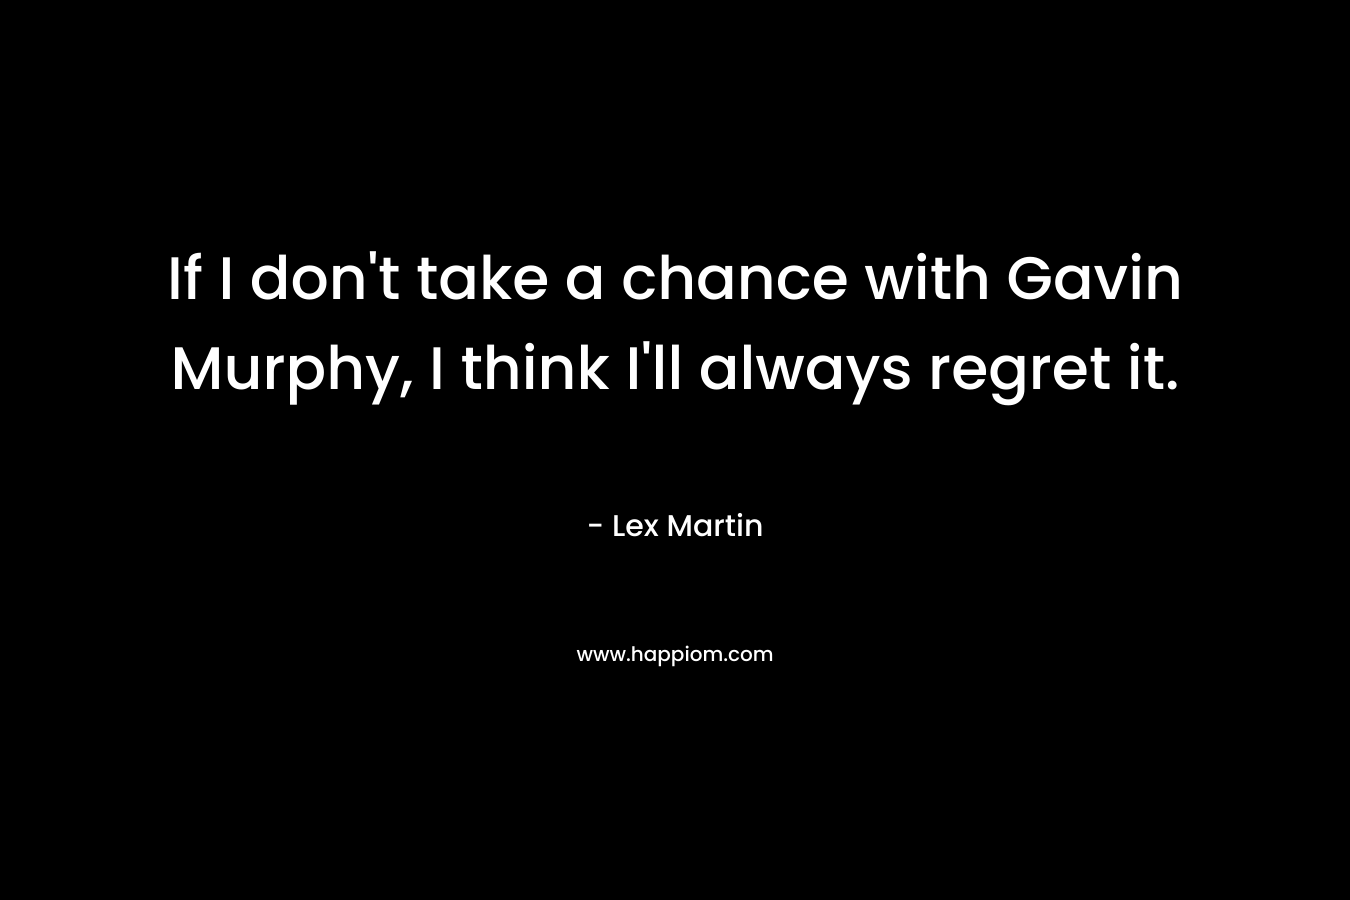 If I don't take a chance with Gavin Murphy, I think I'll always regret it.